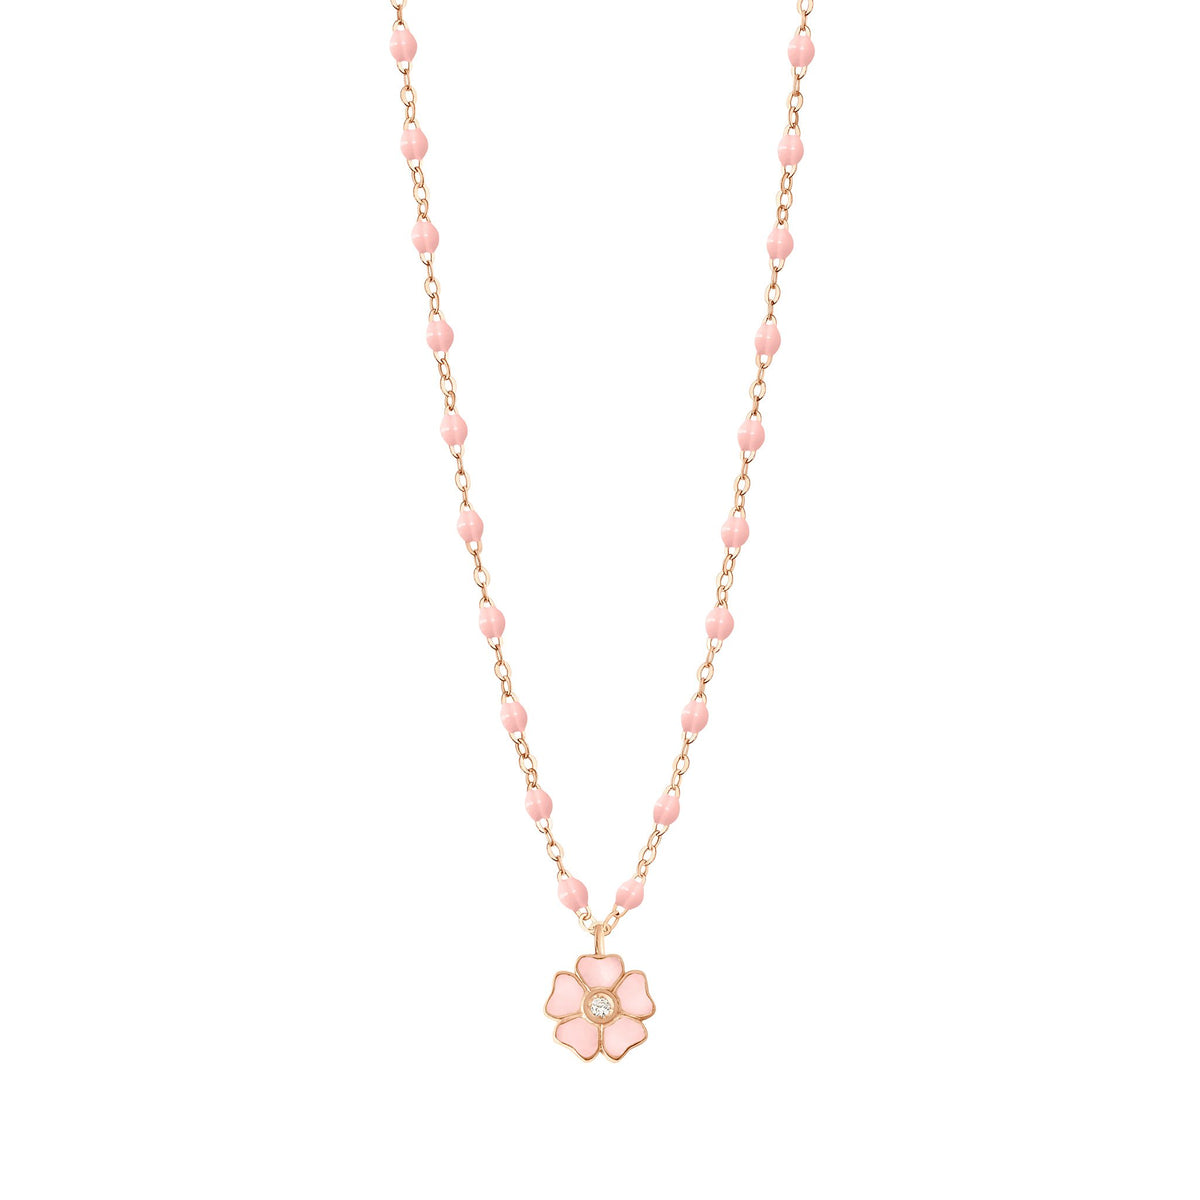 XIAQUJ Design Delicate Rose Flower Zircon Pendant Necklace Rose Gold Plated Charms Rose Fresh Sweet Collarbone Chain Fashion Simple Pink Diamond